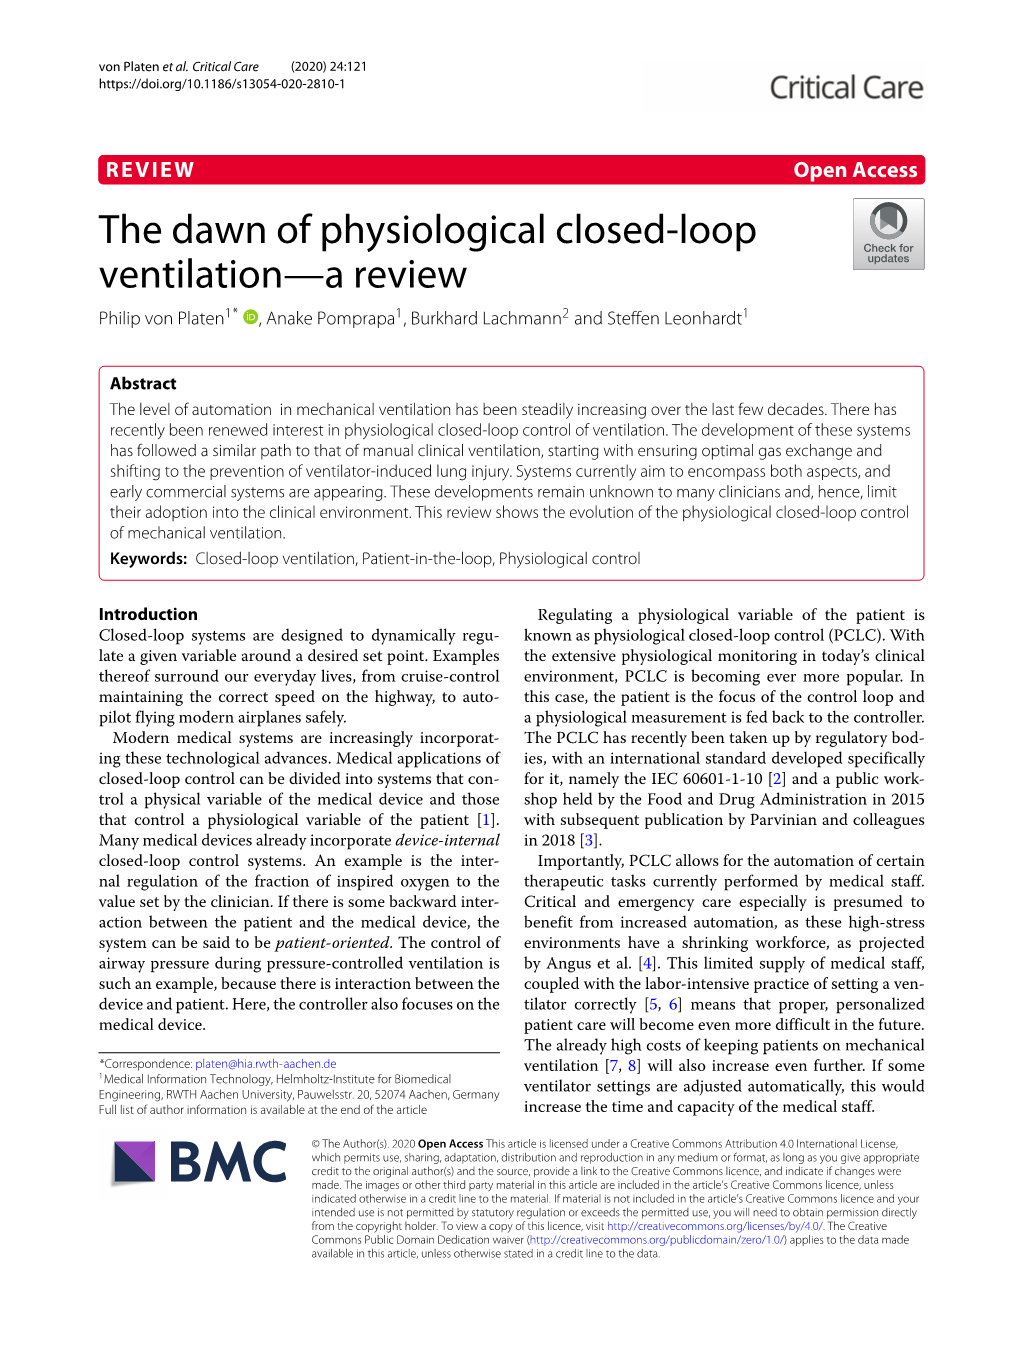 The Dawn of Physiological Closed-Loop Ventilation—A Review Philip Von Platen1* , Anake Pomprapa1, Burkhard Lachmann2 and Steffen Leonhardt1